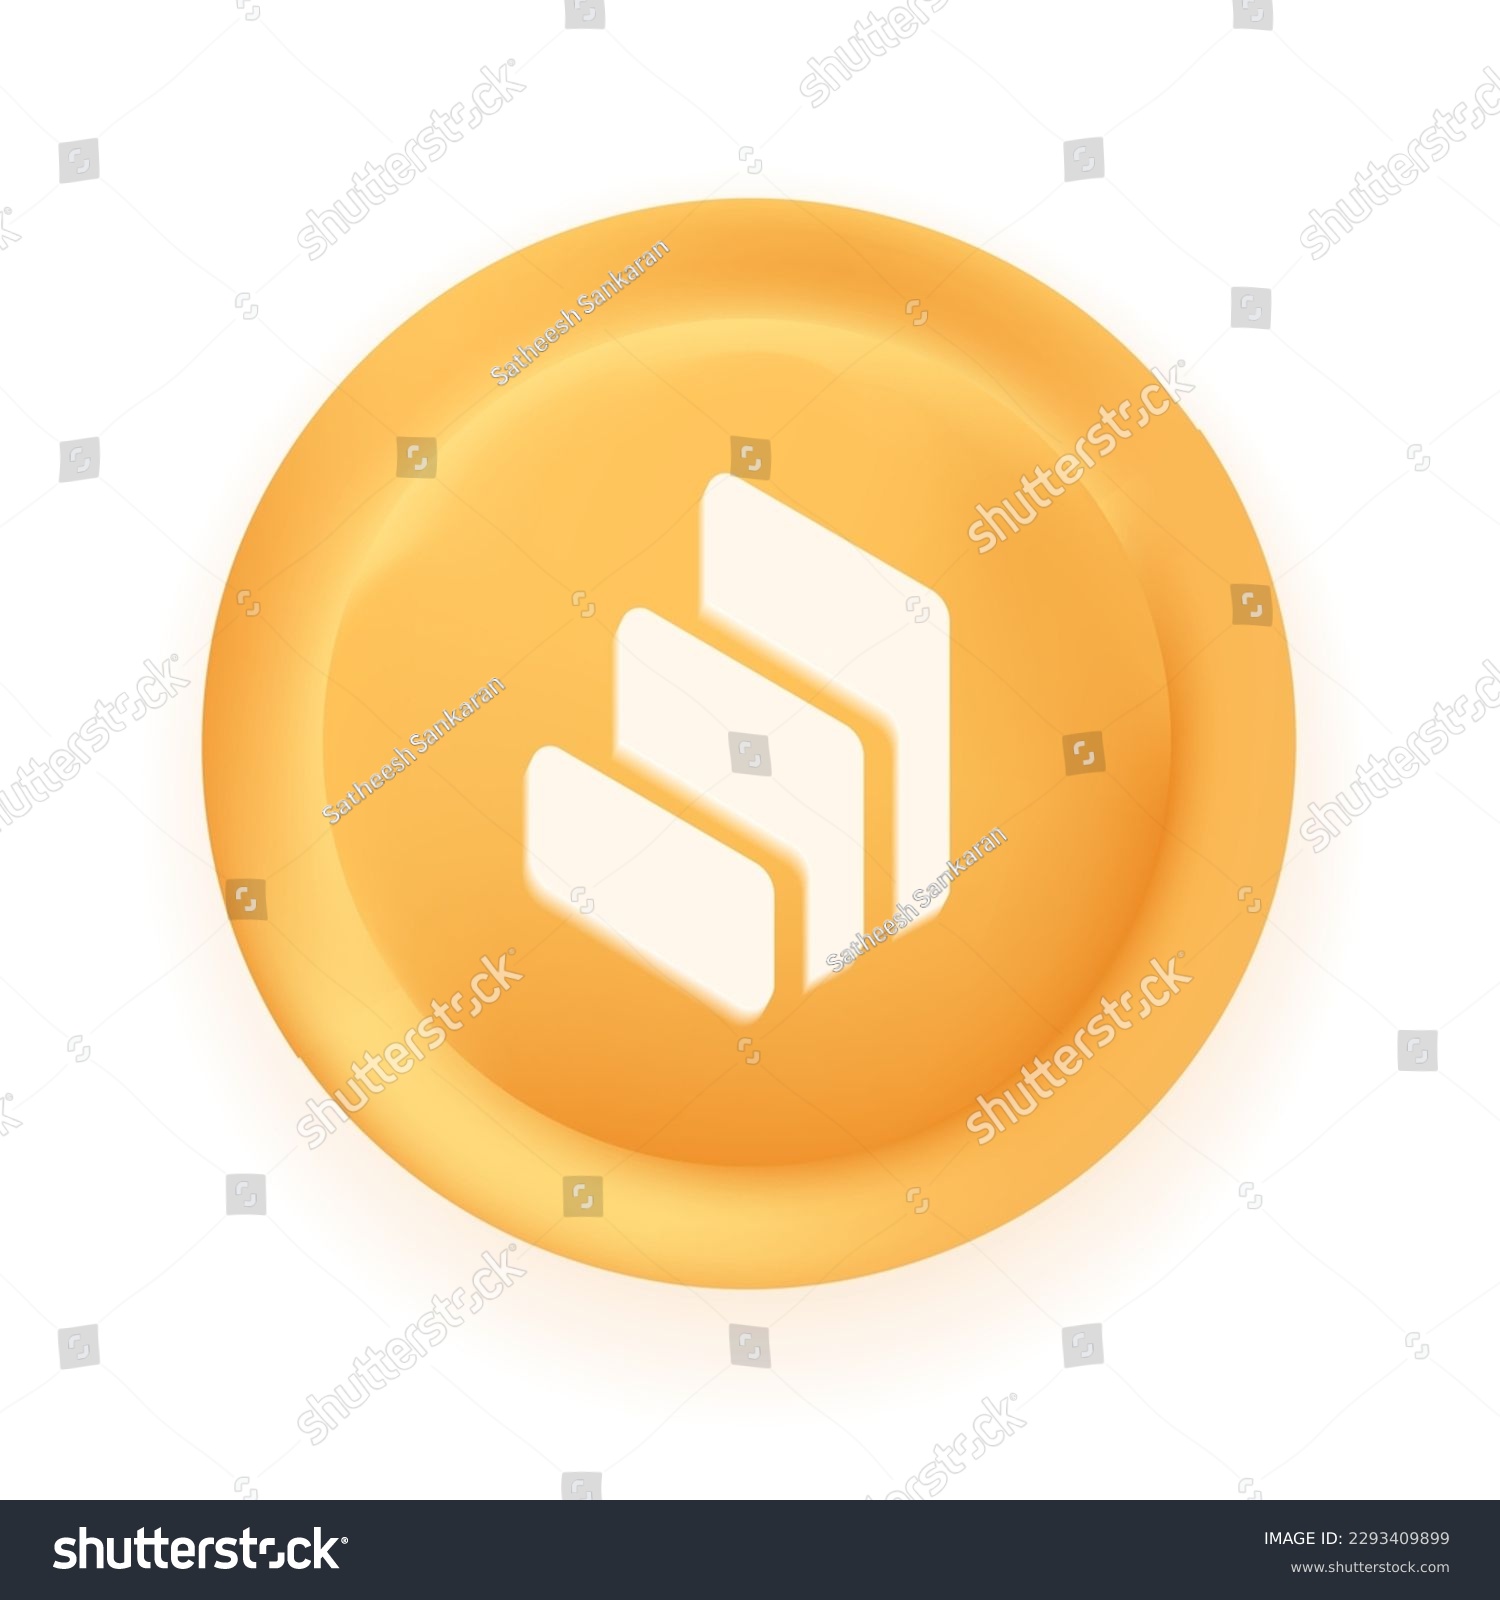 SVG of Compound (COMP) crypto currency 3D coin vector illustration isolated on white background. Can be used as virtual money icon, logo, emblem, sticker and badge designs. svg